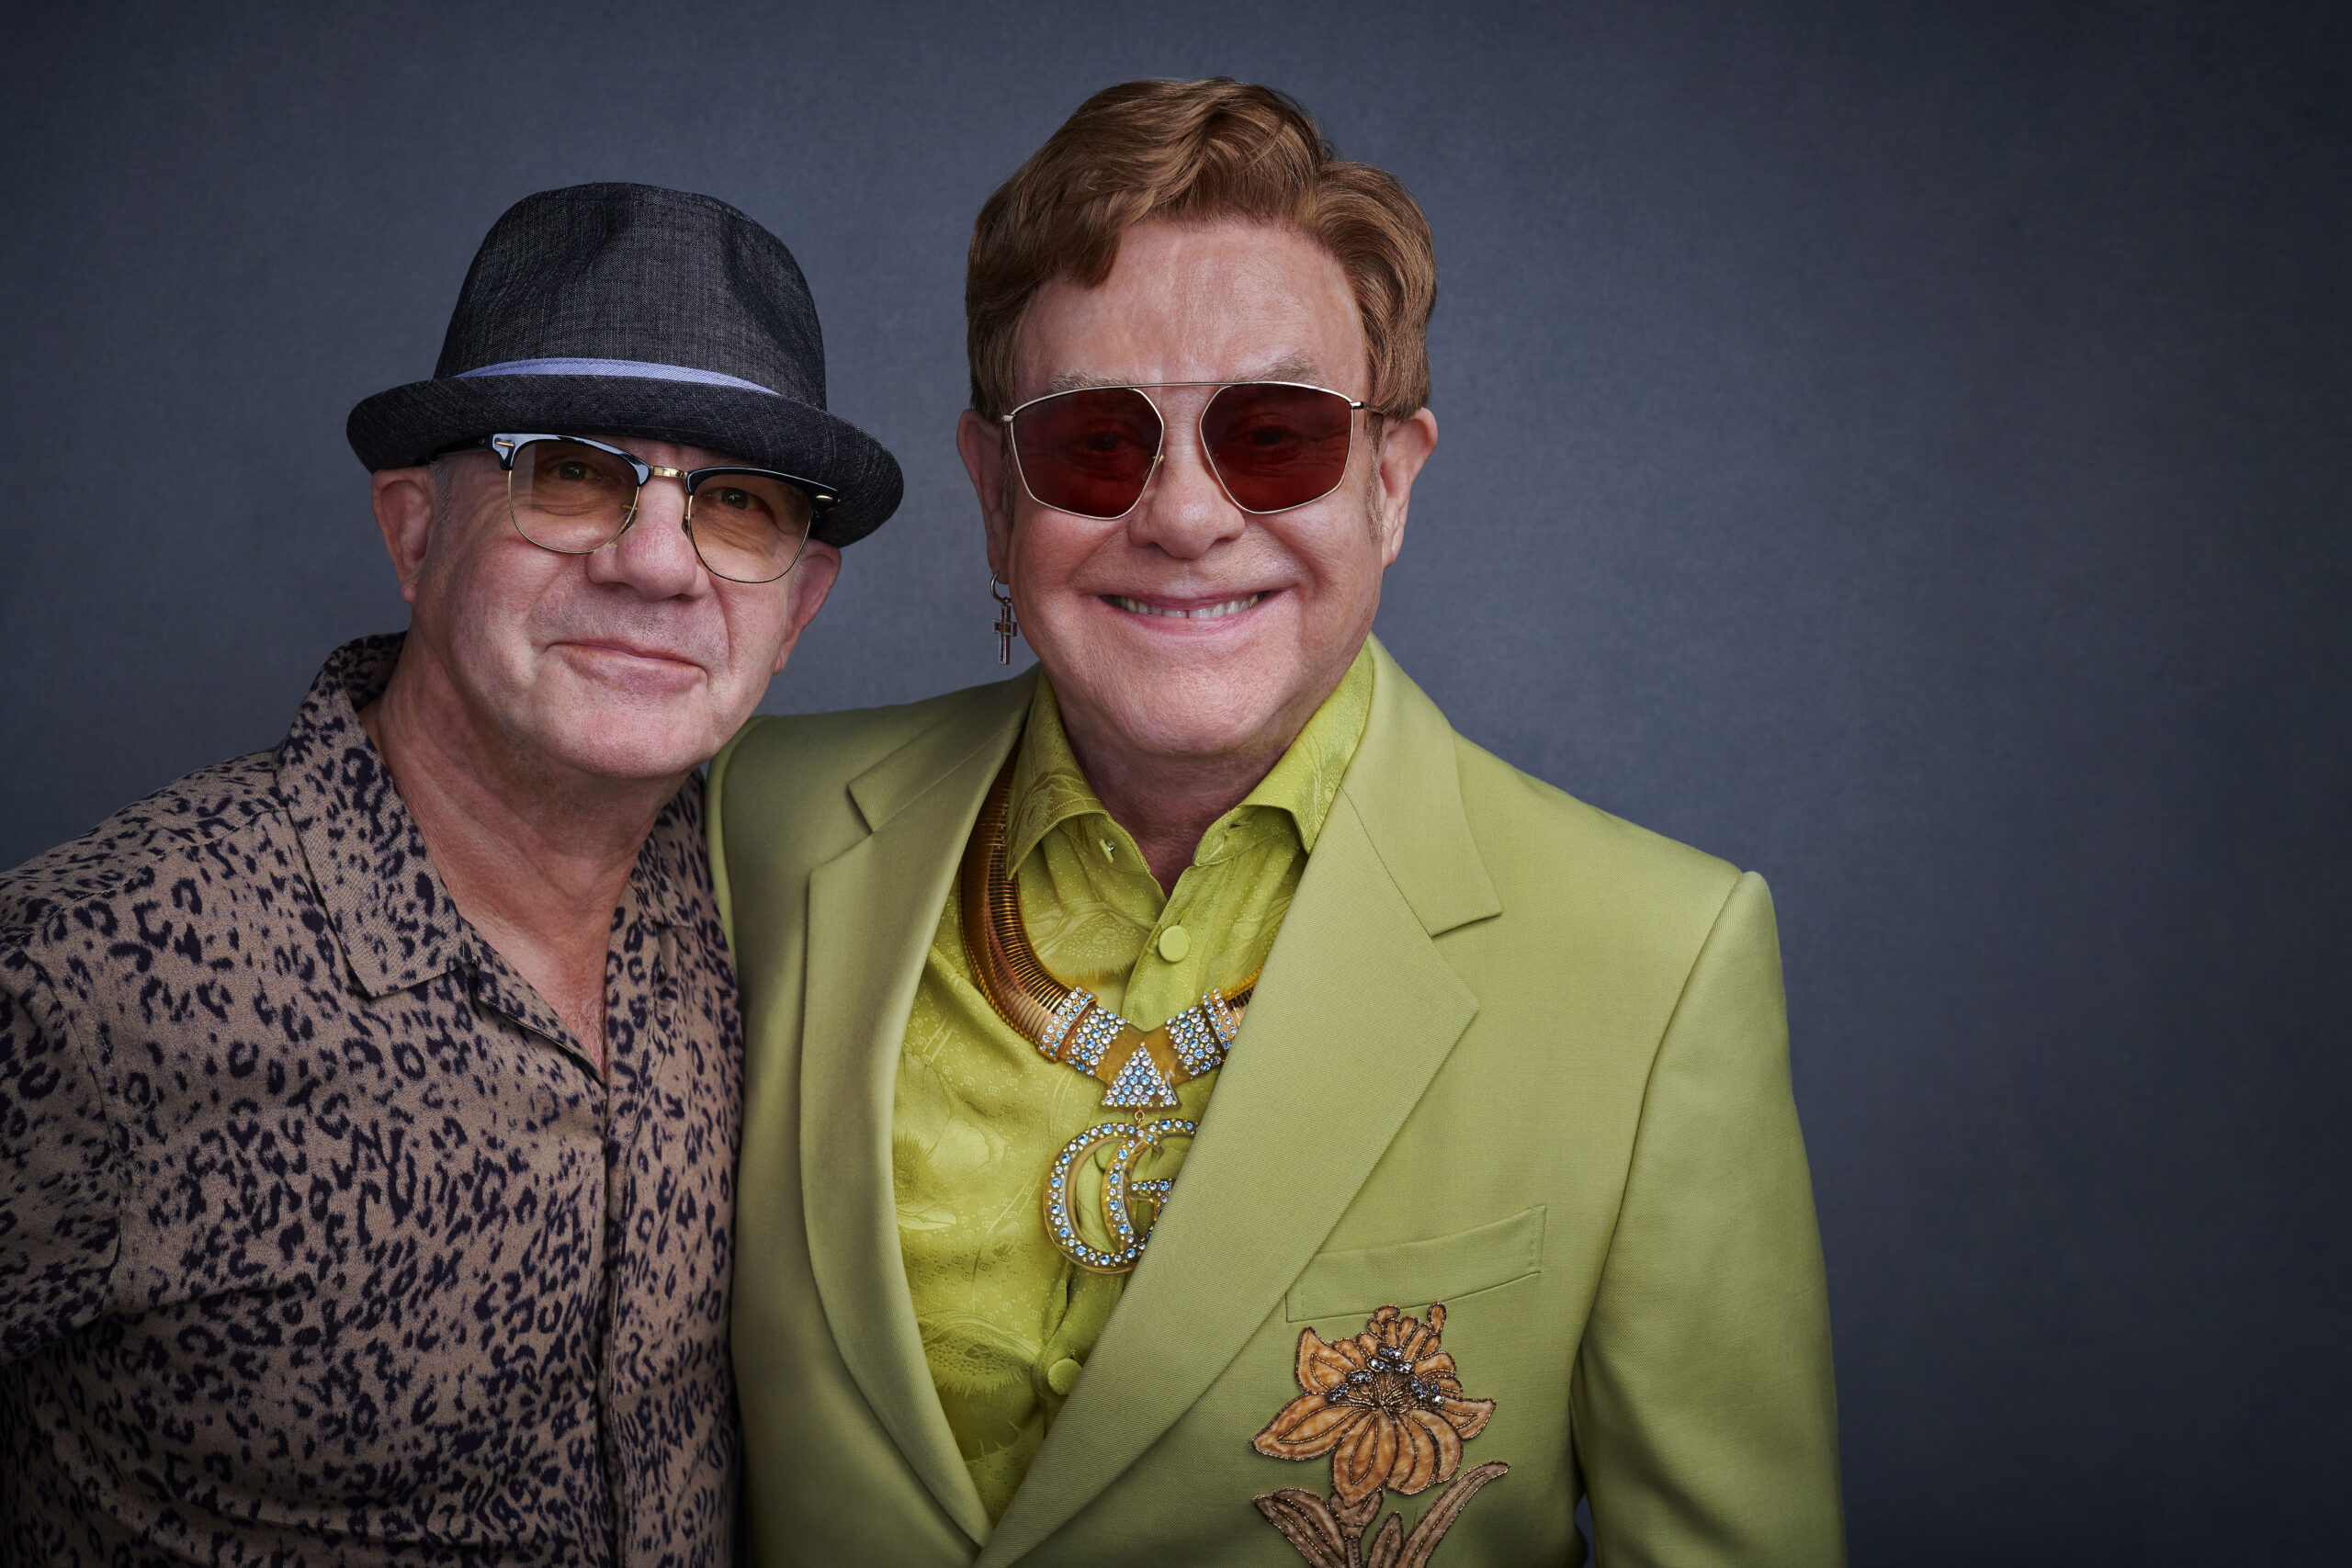 Two white males stand together smiling at the camera. The man on the left is wearing a brimmed brown hat, sun glasses and a brown patterned button down. The man on the right has short brown hair. He's wearing sunglasses and bright green blazer and matching button down shirt.